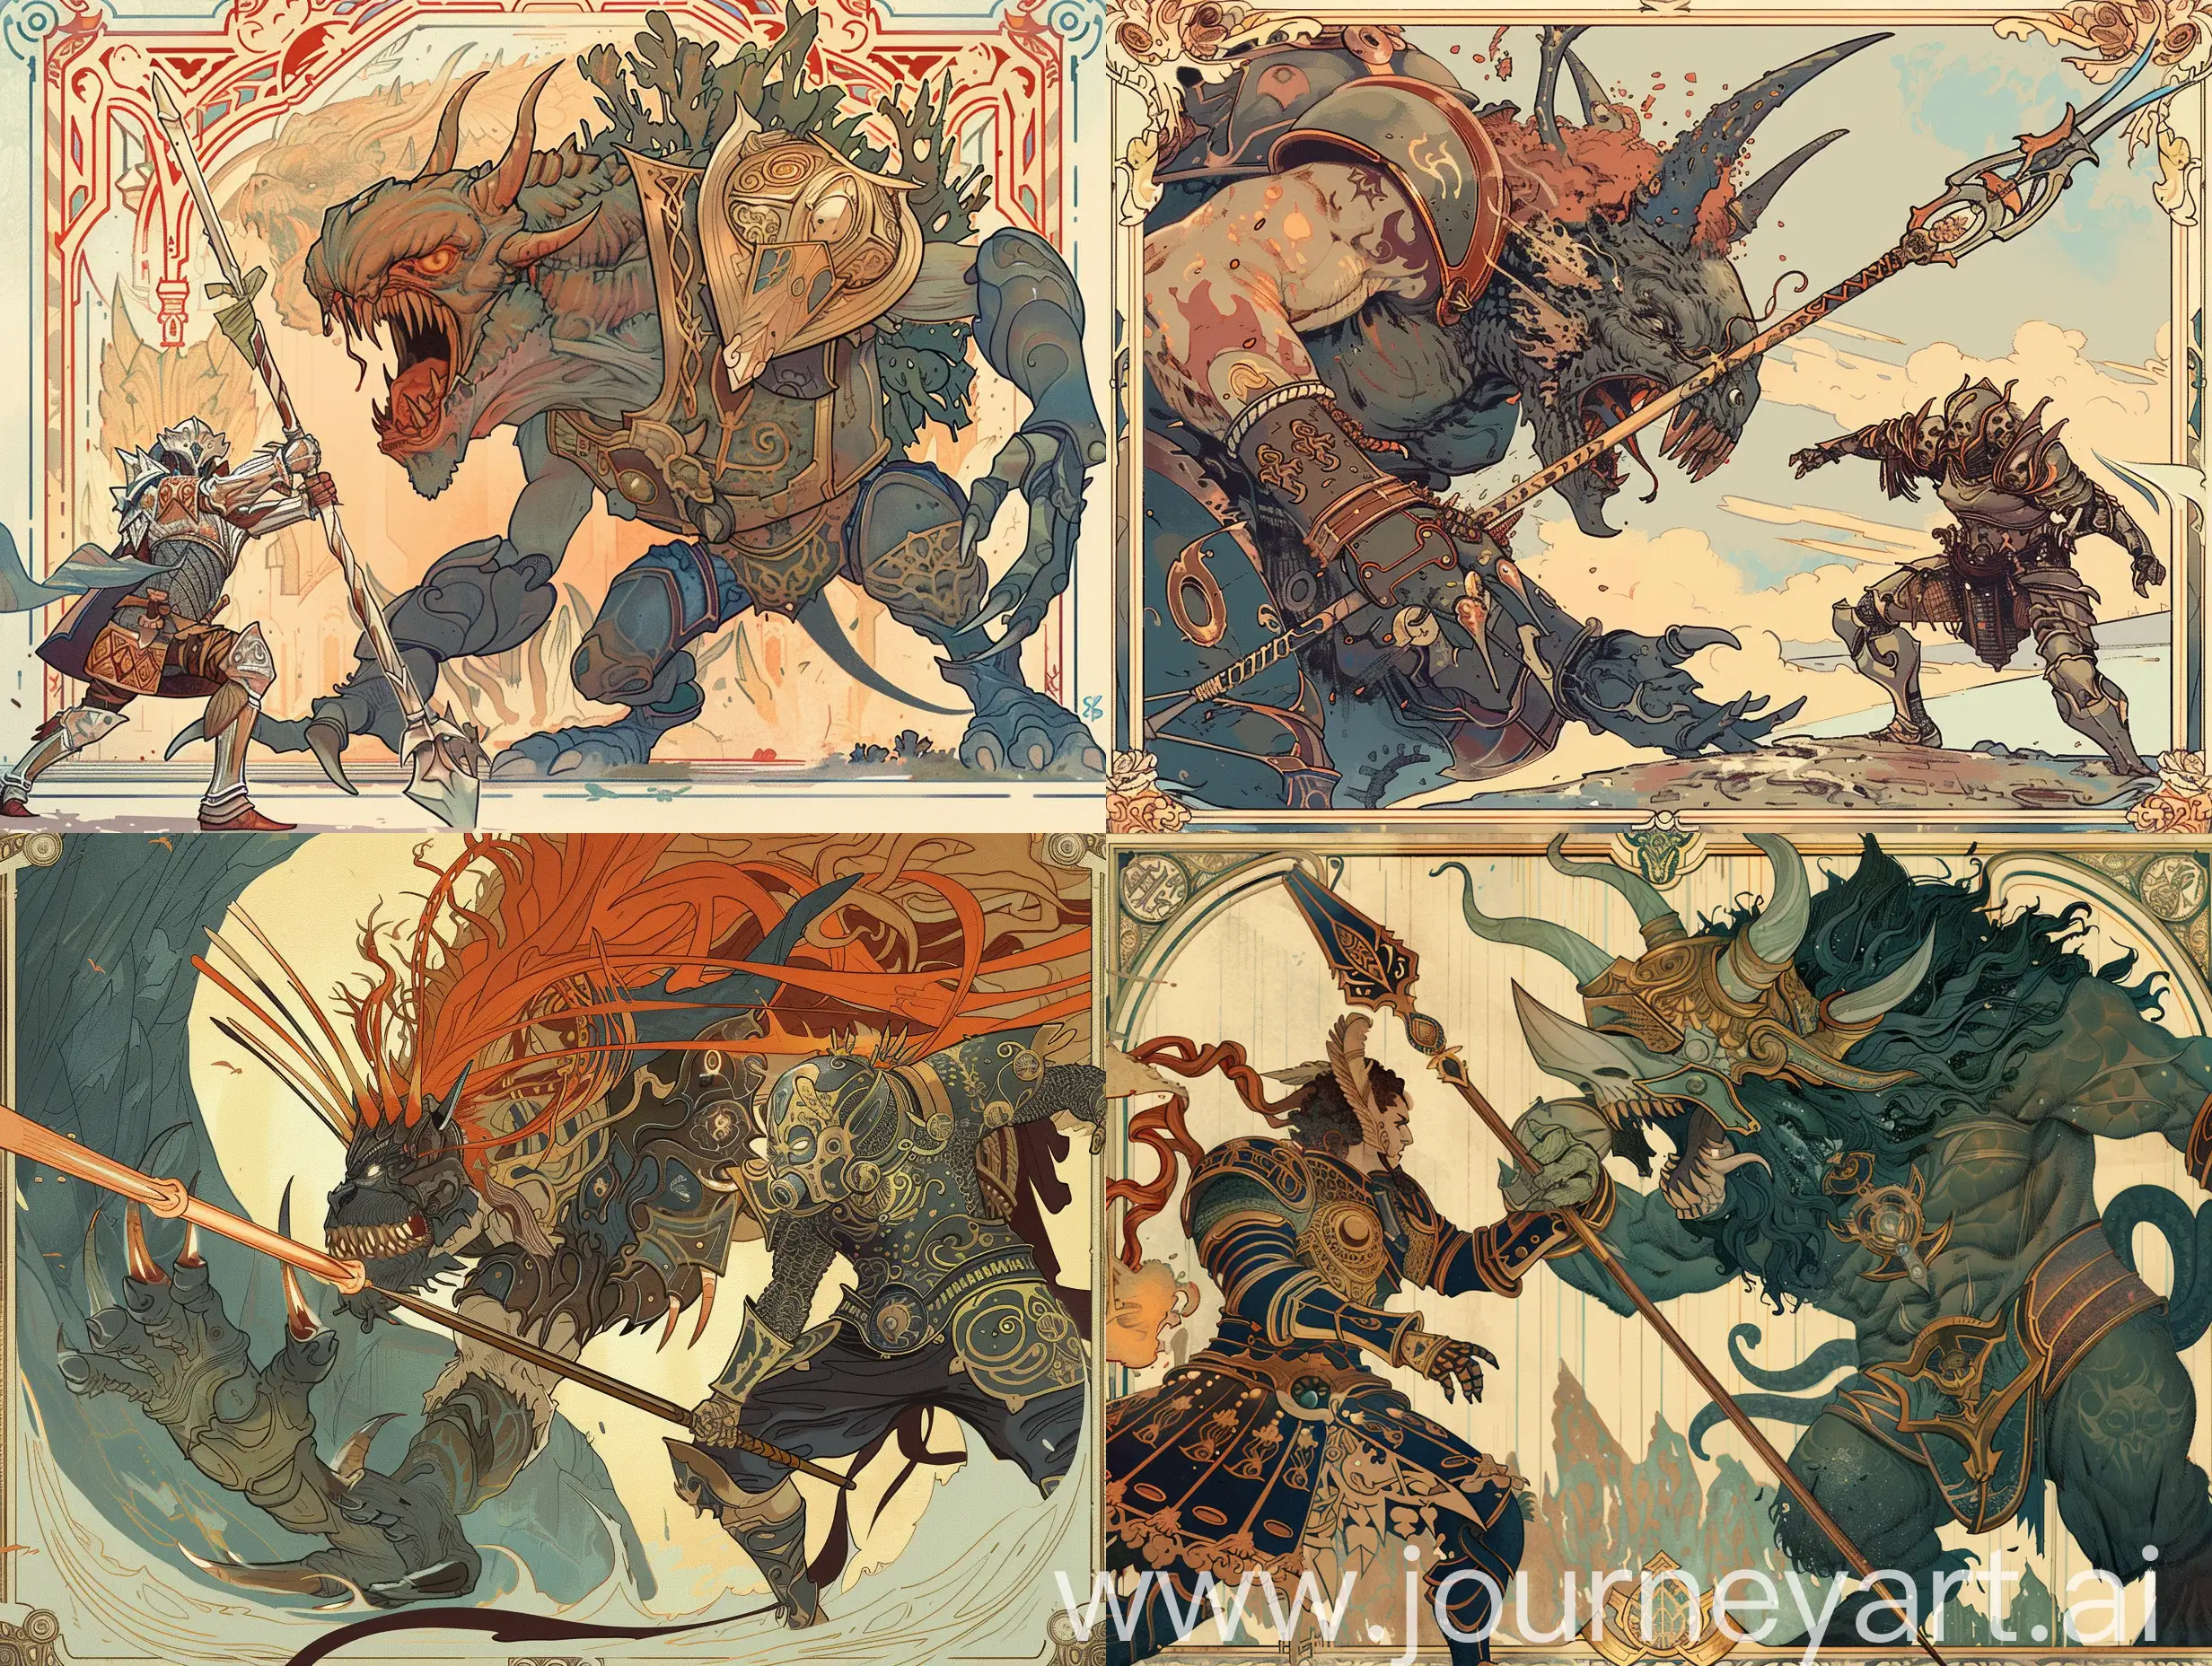 art nouveau style an image of a action battle scene of a warrior in armor with a spear, against a two-headed huge scary monster. art nouveau style, Alphonse mucha style. high-quality anatomy. high detalisation. the absence of failures. fight 8k.